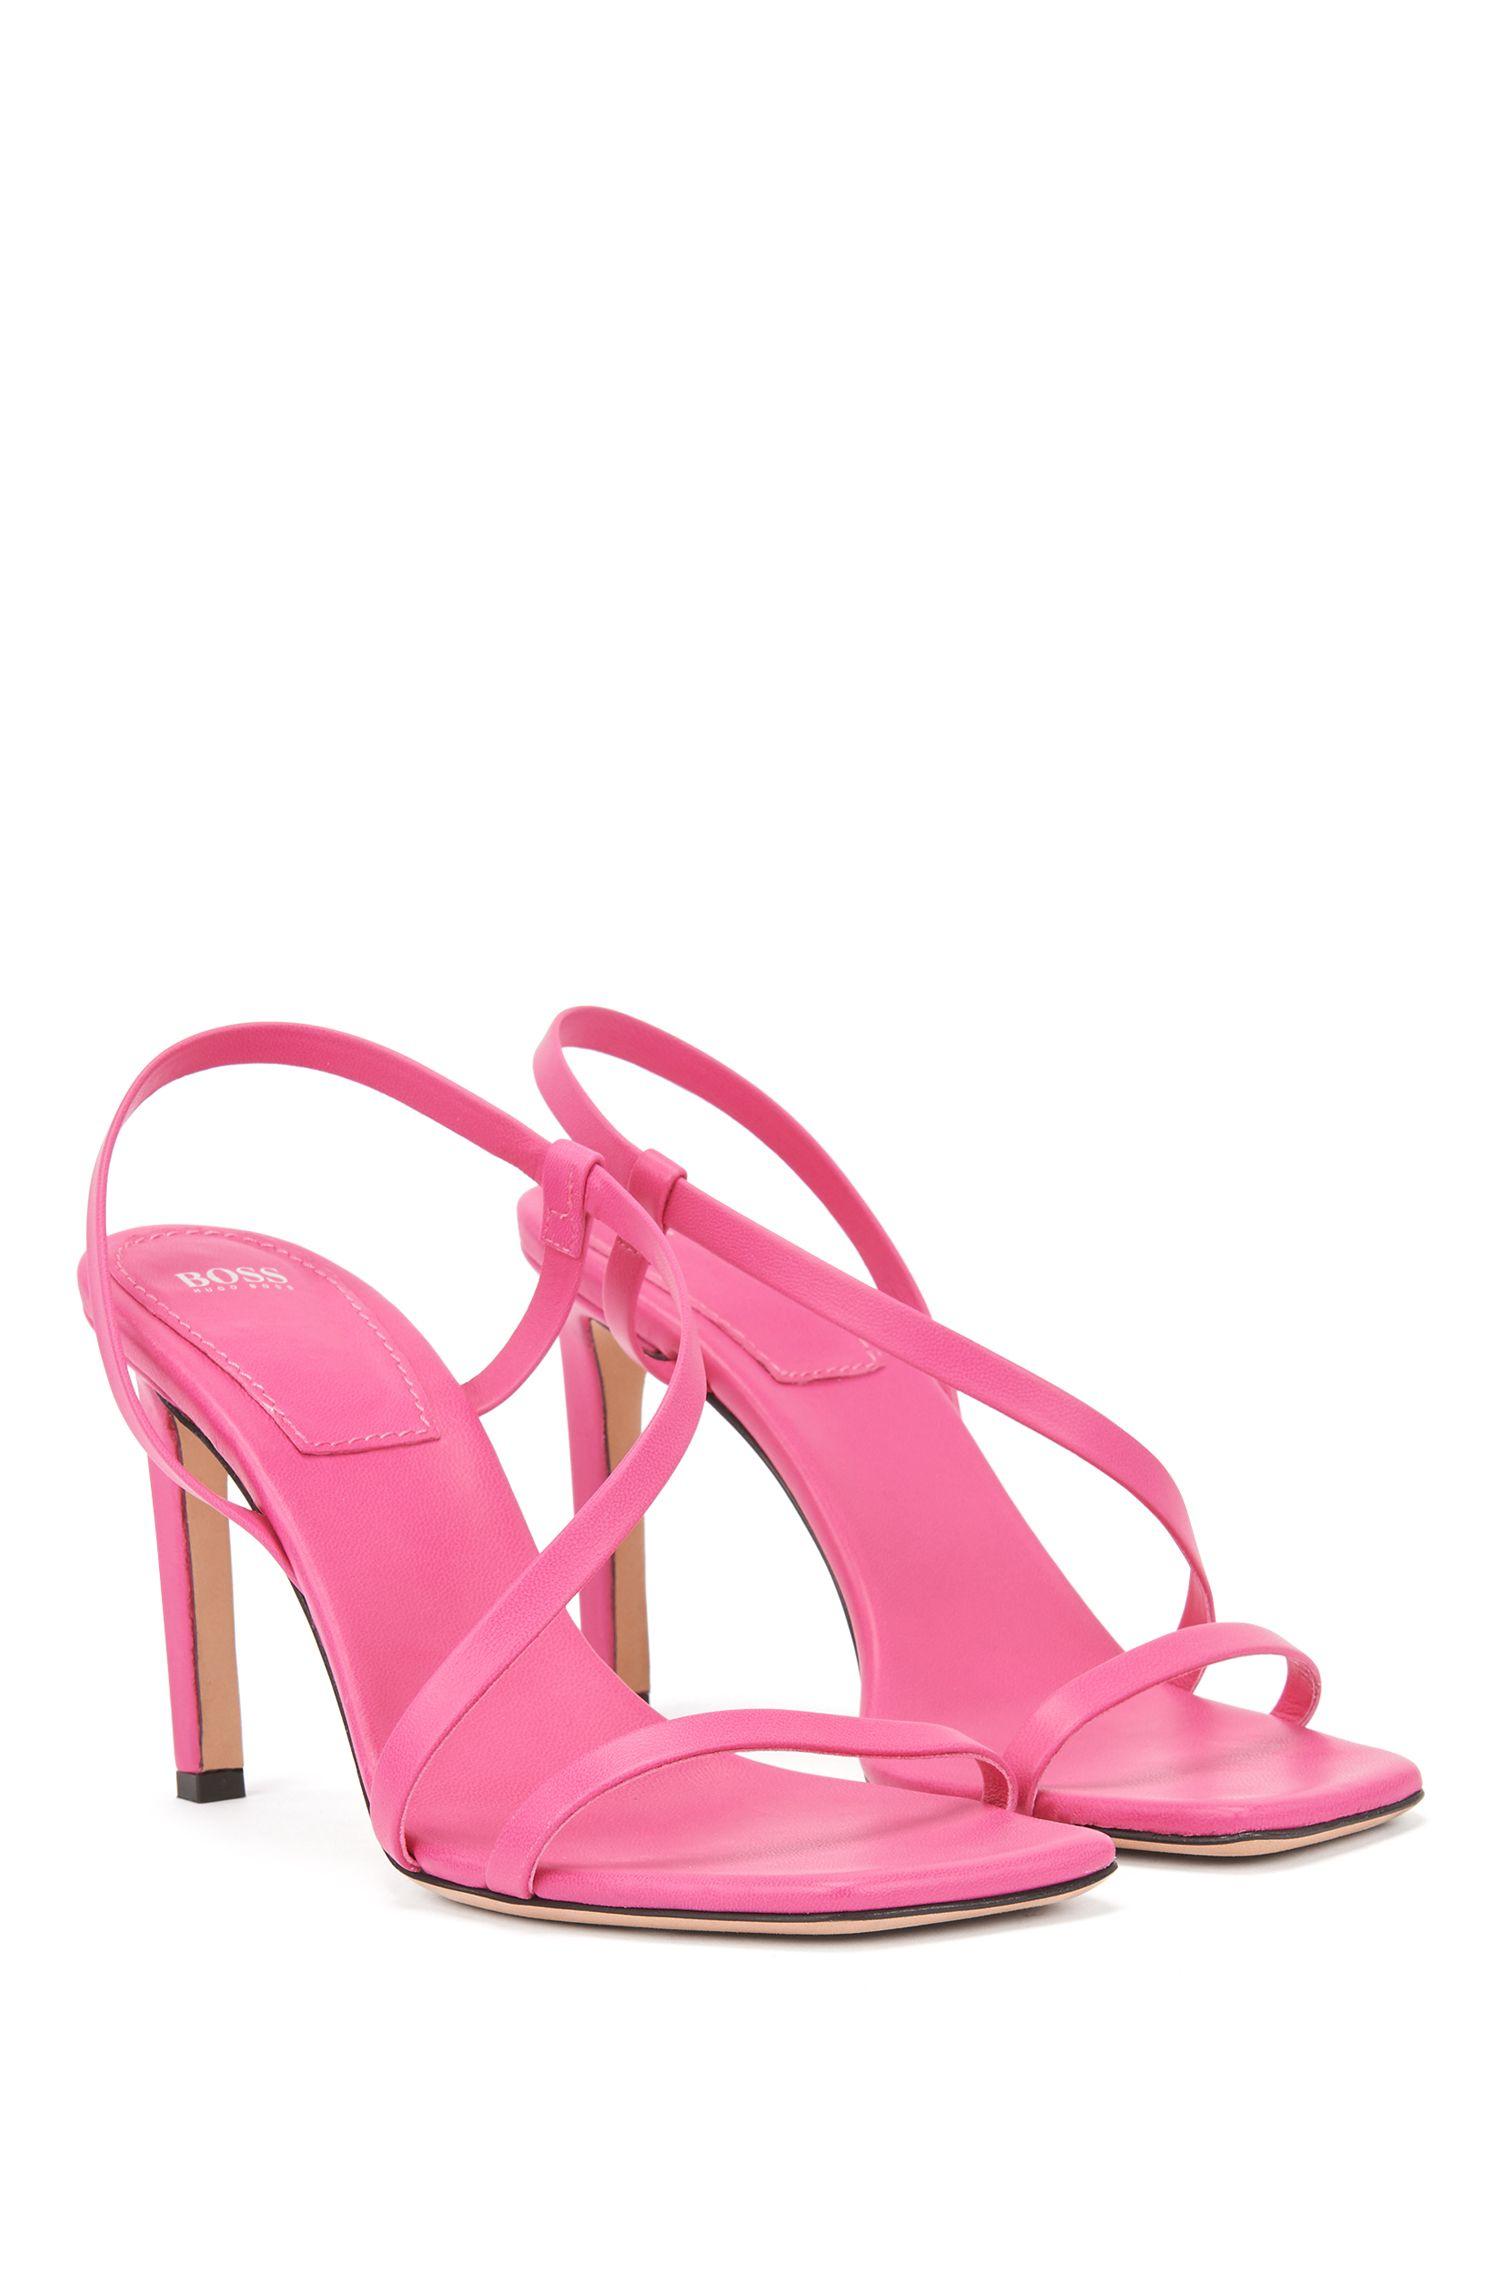 BOSS by Hugo Boss High Heeled Sandals In Nappa Leather With Asymmetric ...